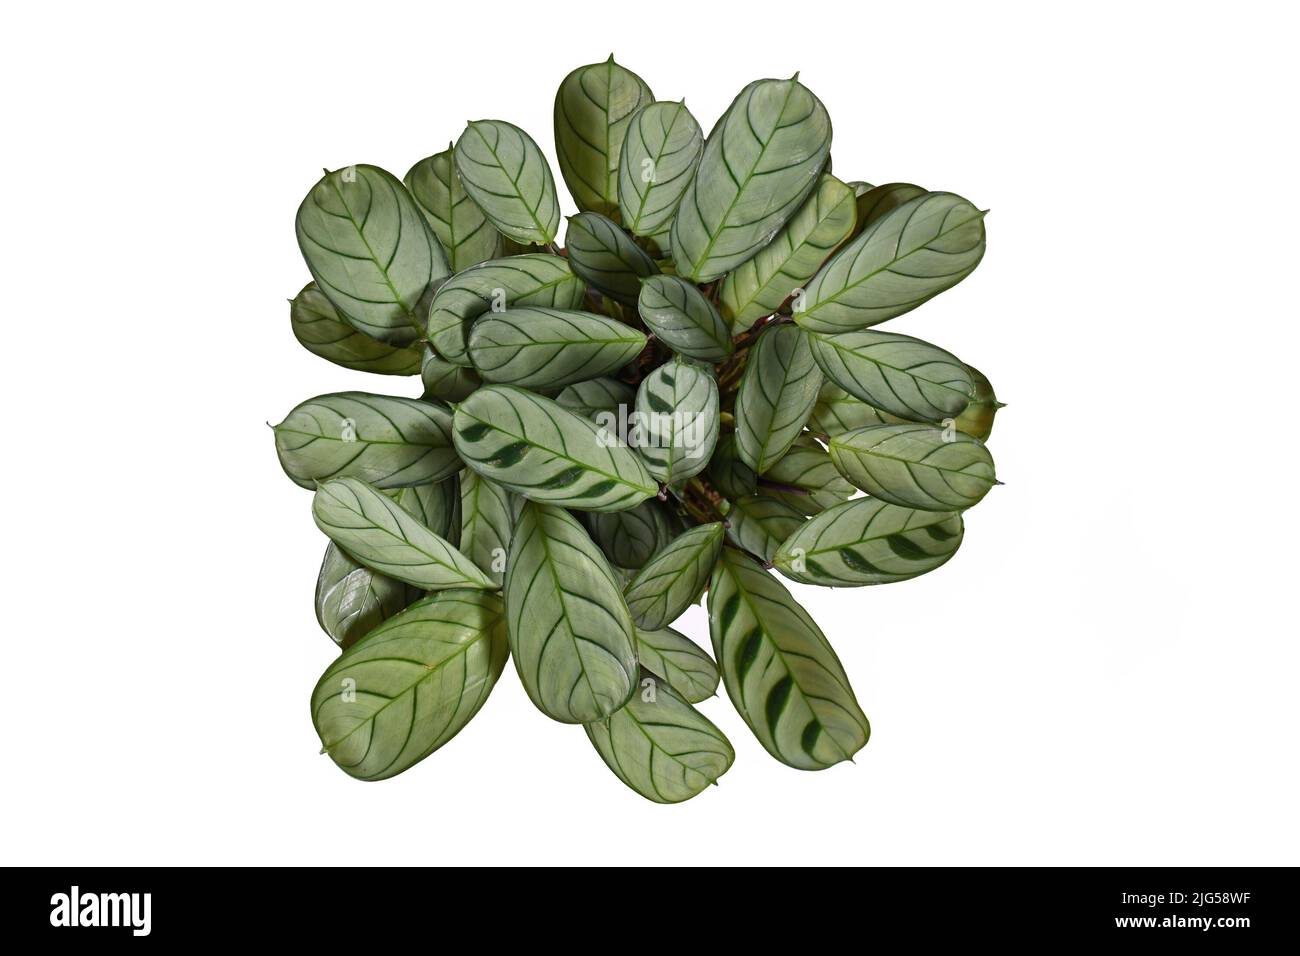 Top view of tropical 'Ctenanthe Burle Marxii Amagris' houseplant with dark green vein pattern on white background Stock Photo